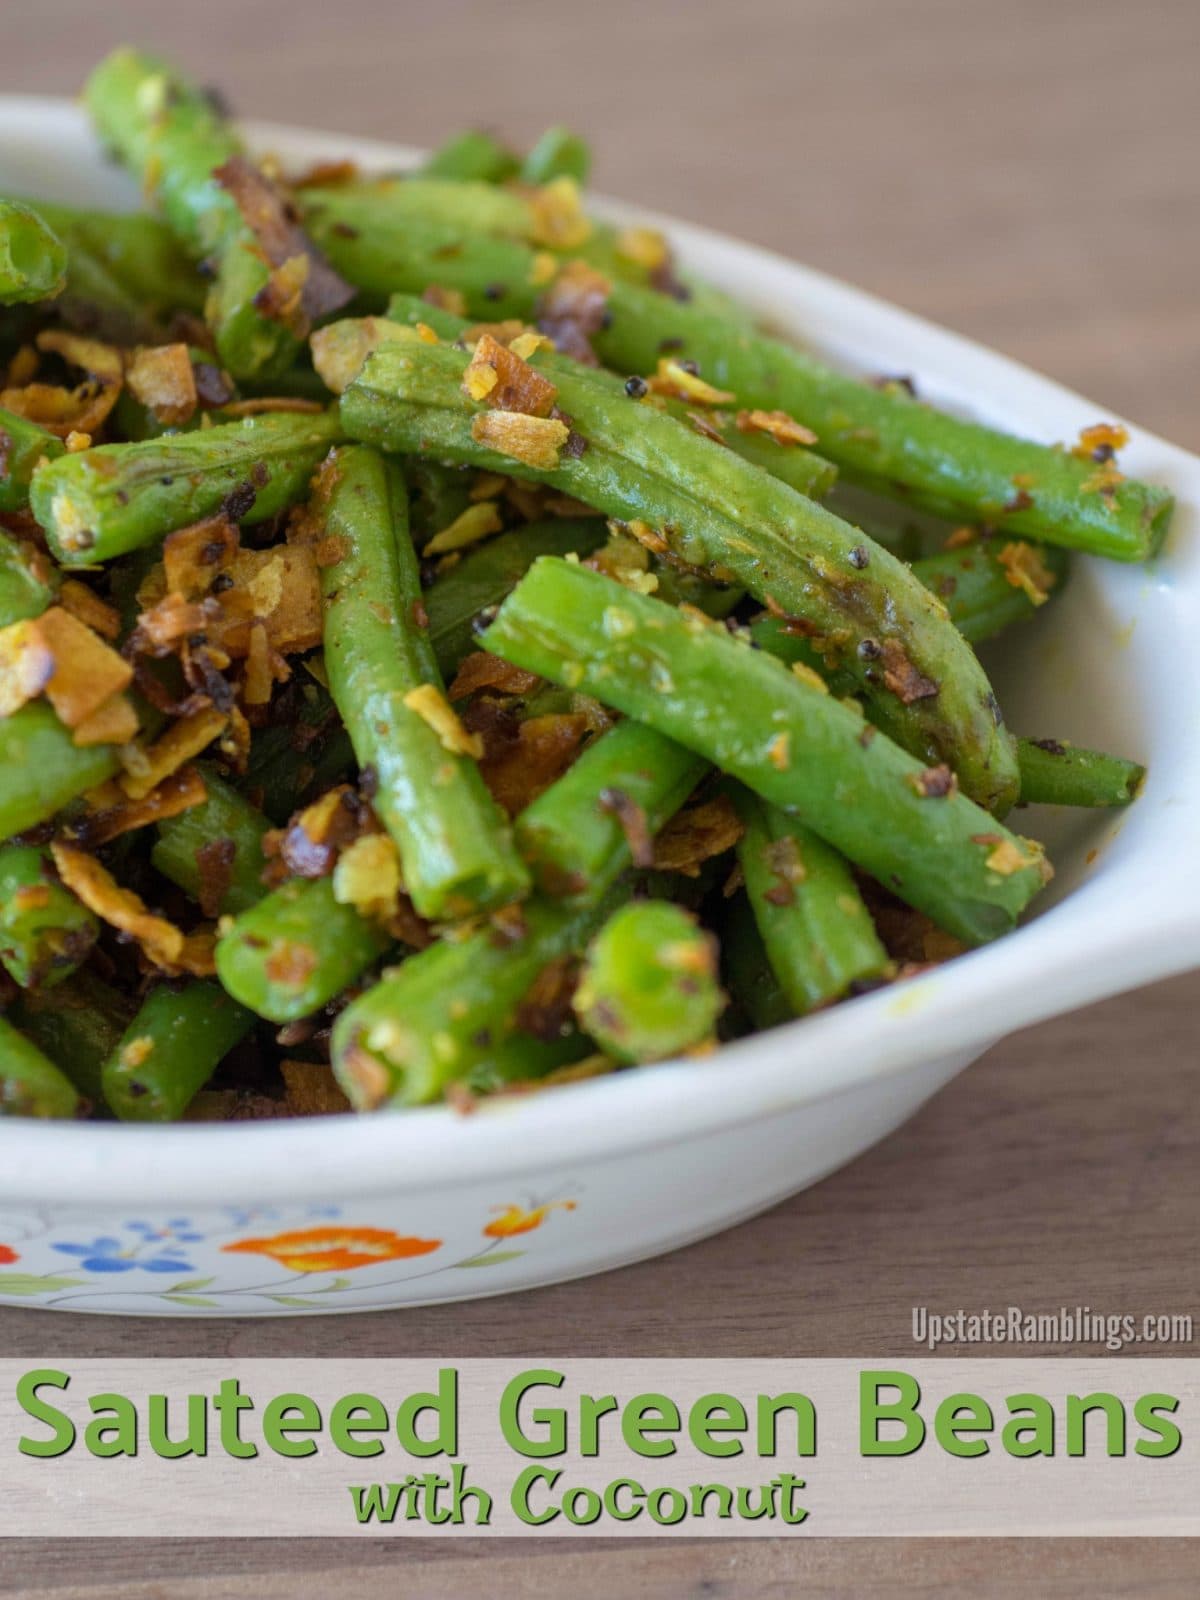 Coconut-infused sauteed green beans.